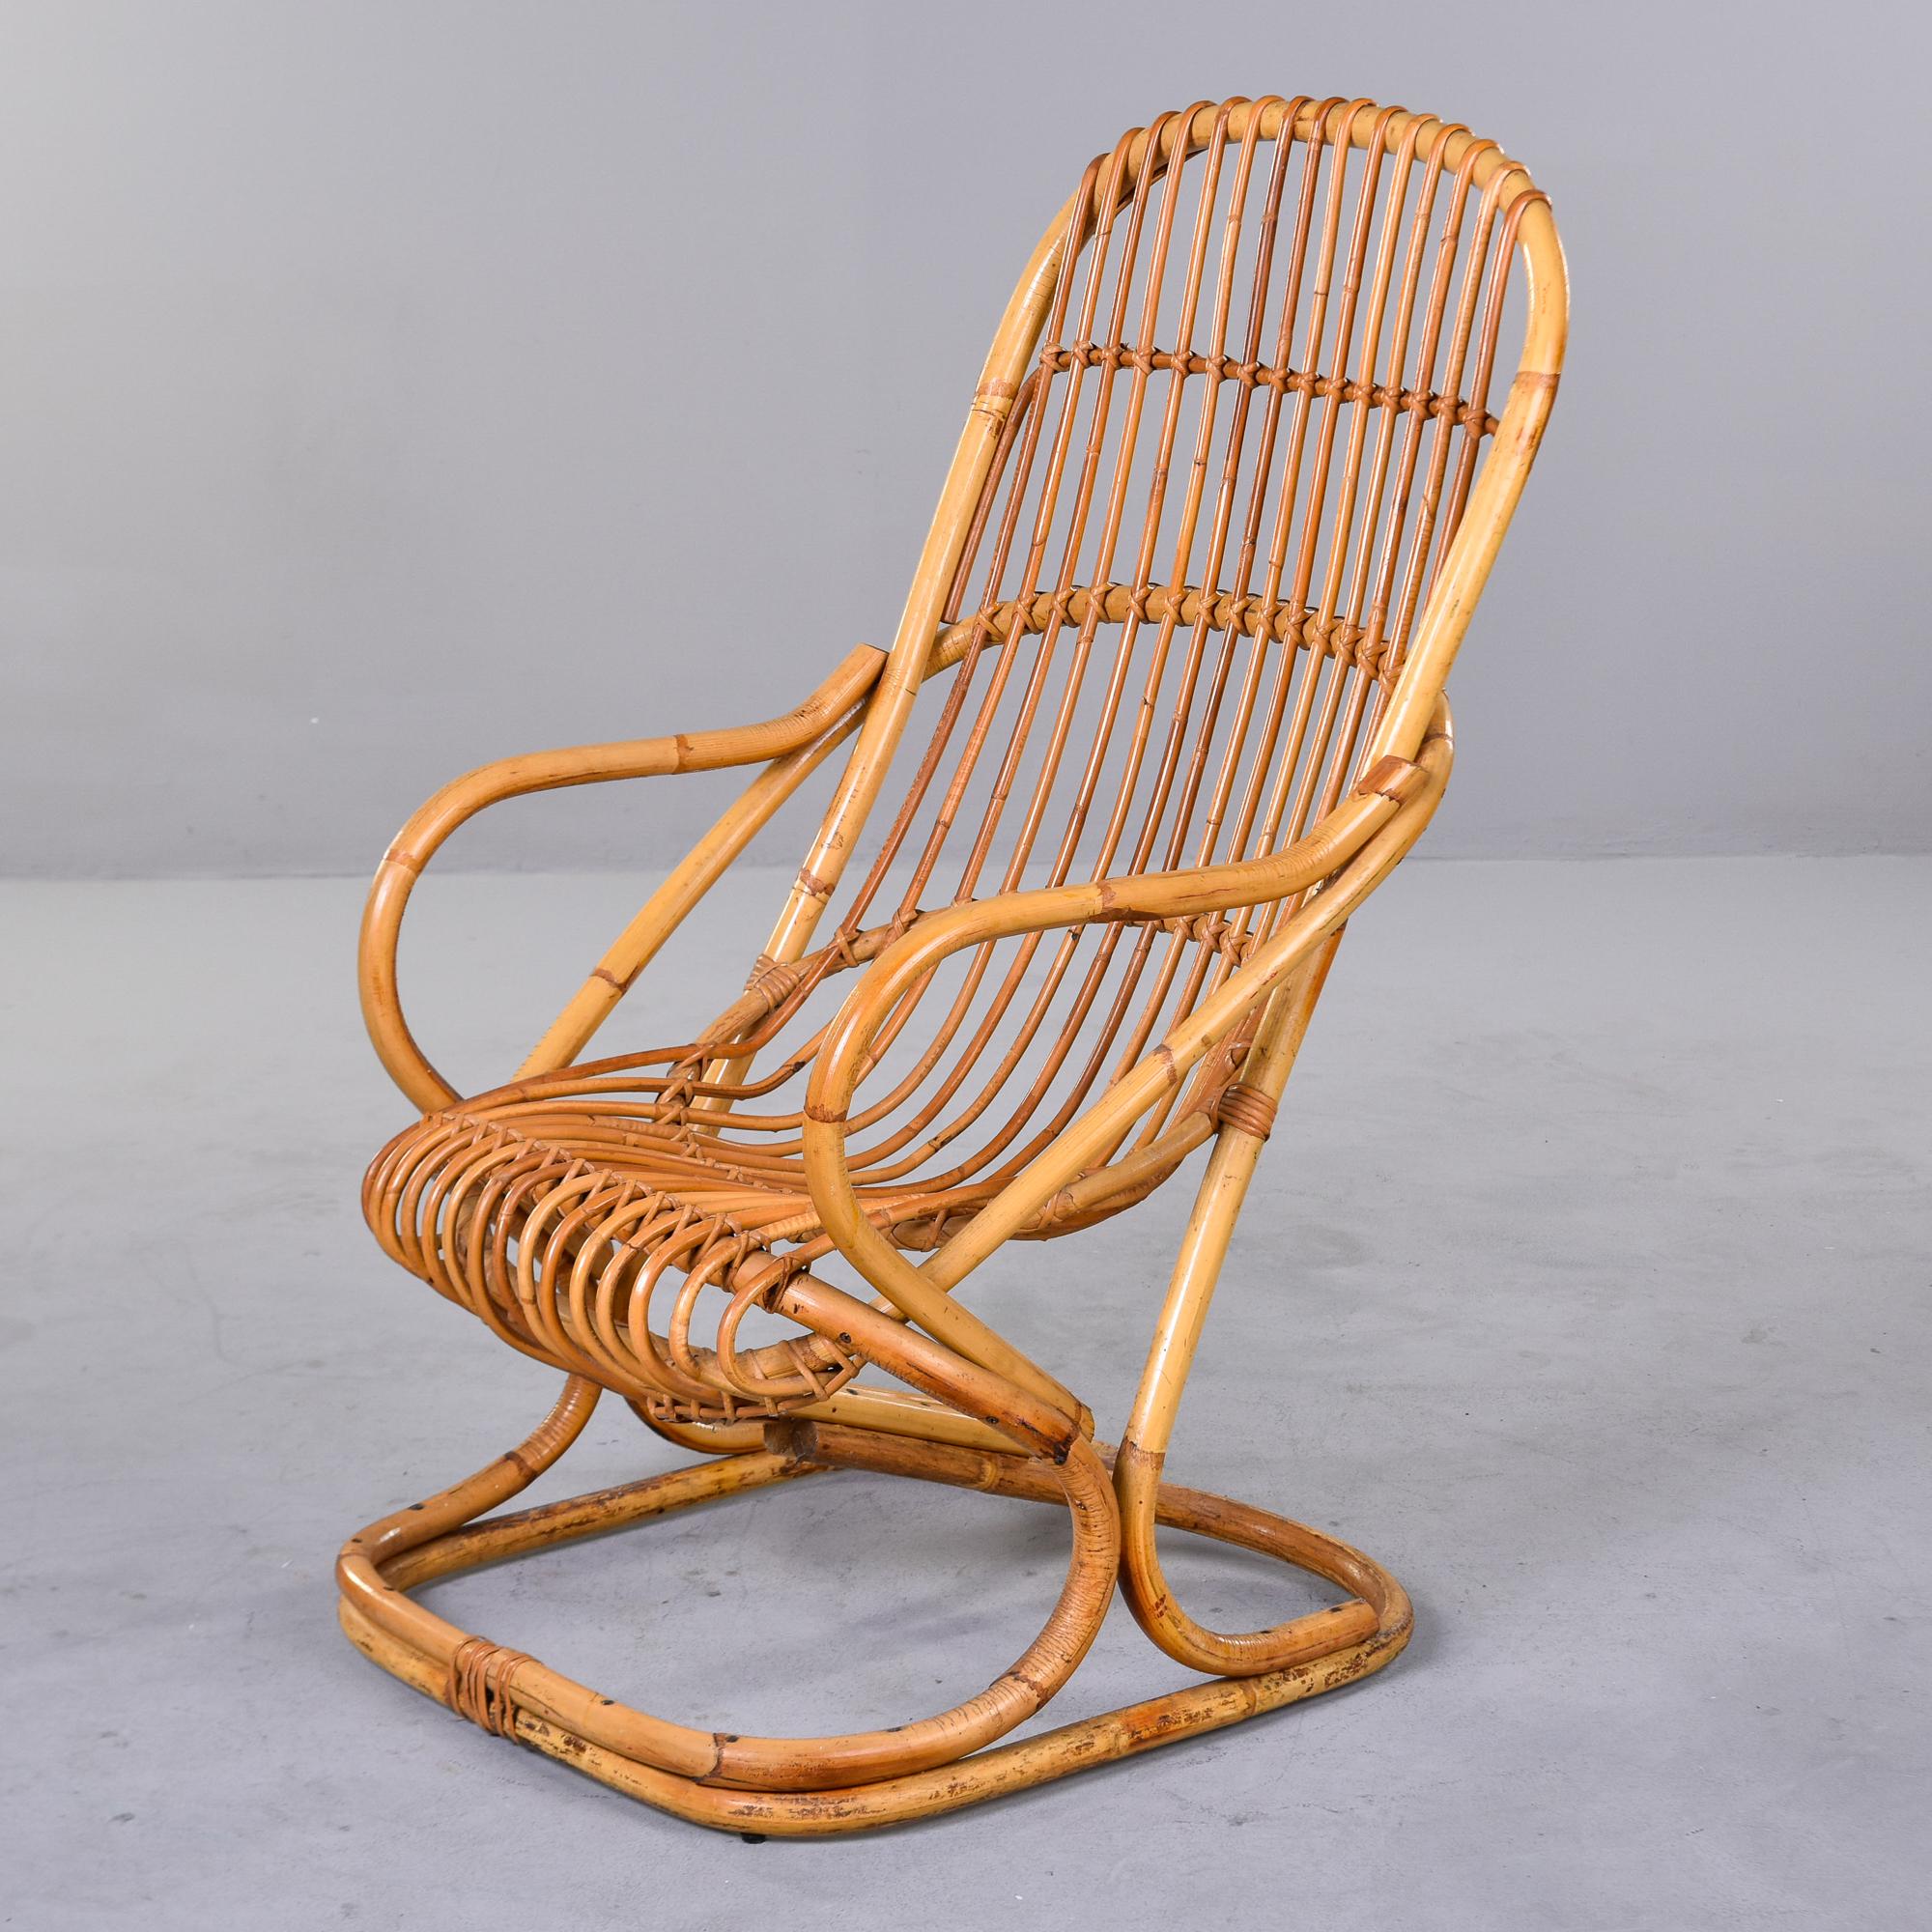 Found in Italy, this rattan armchair was designed by Tito Agnoli in 1950. Curvy and comfortable, this single chair can be used with or without a cushion. At the time of this posting, we have another pair of this same style/maker available. If